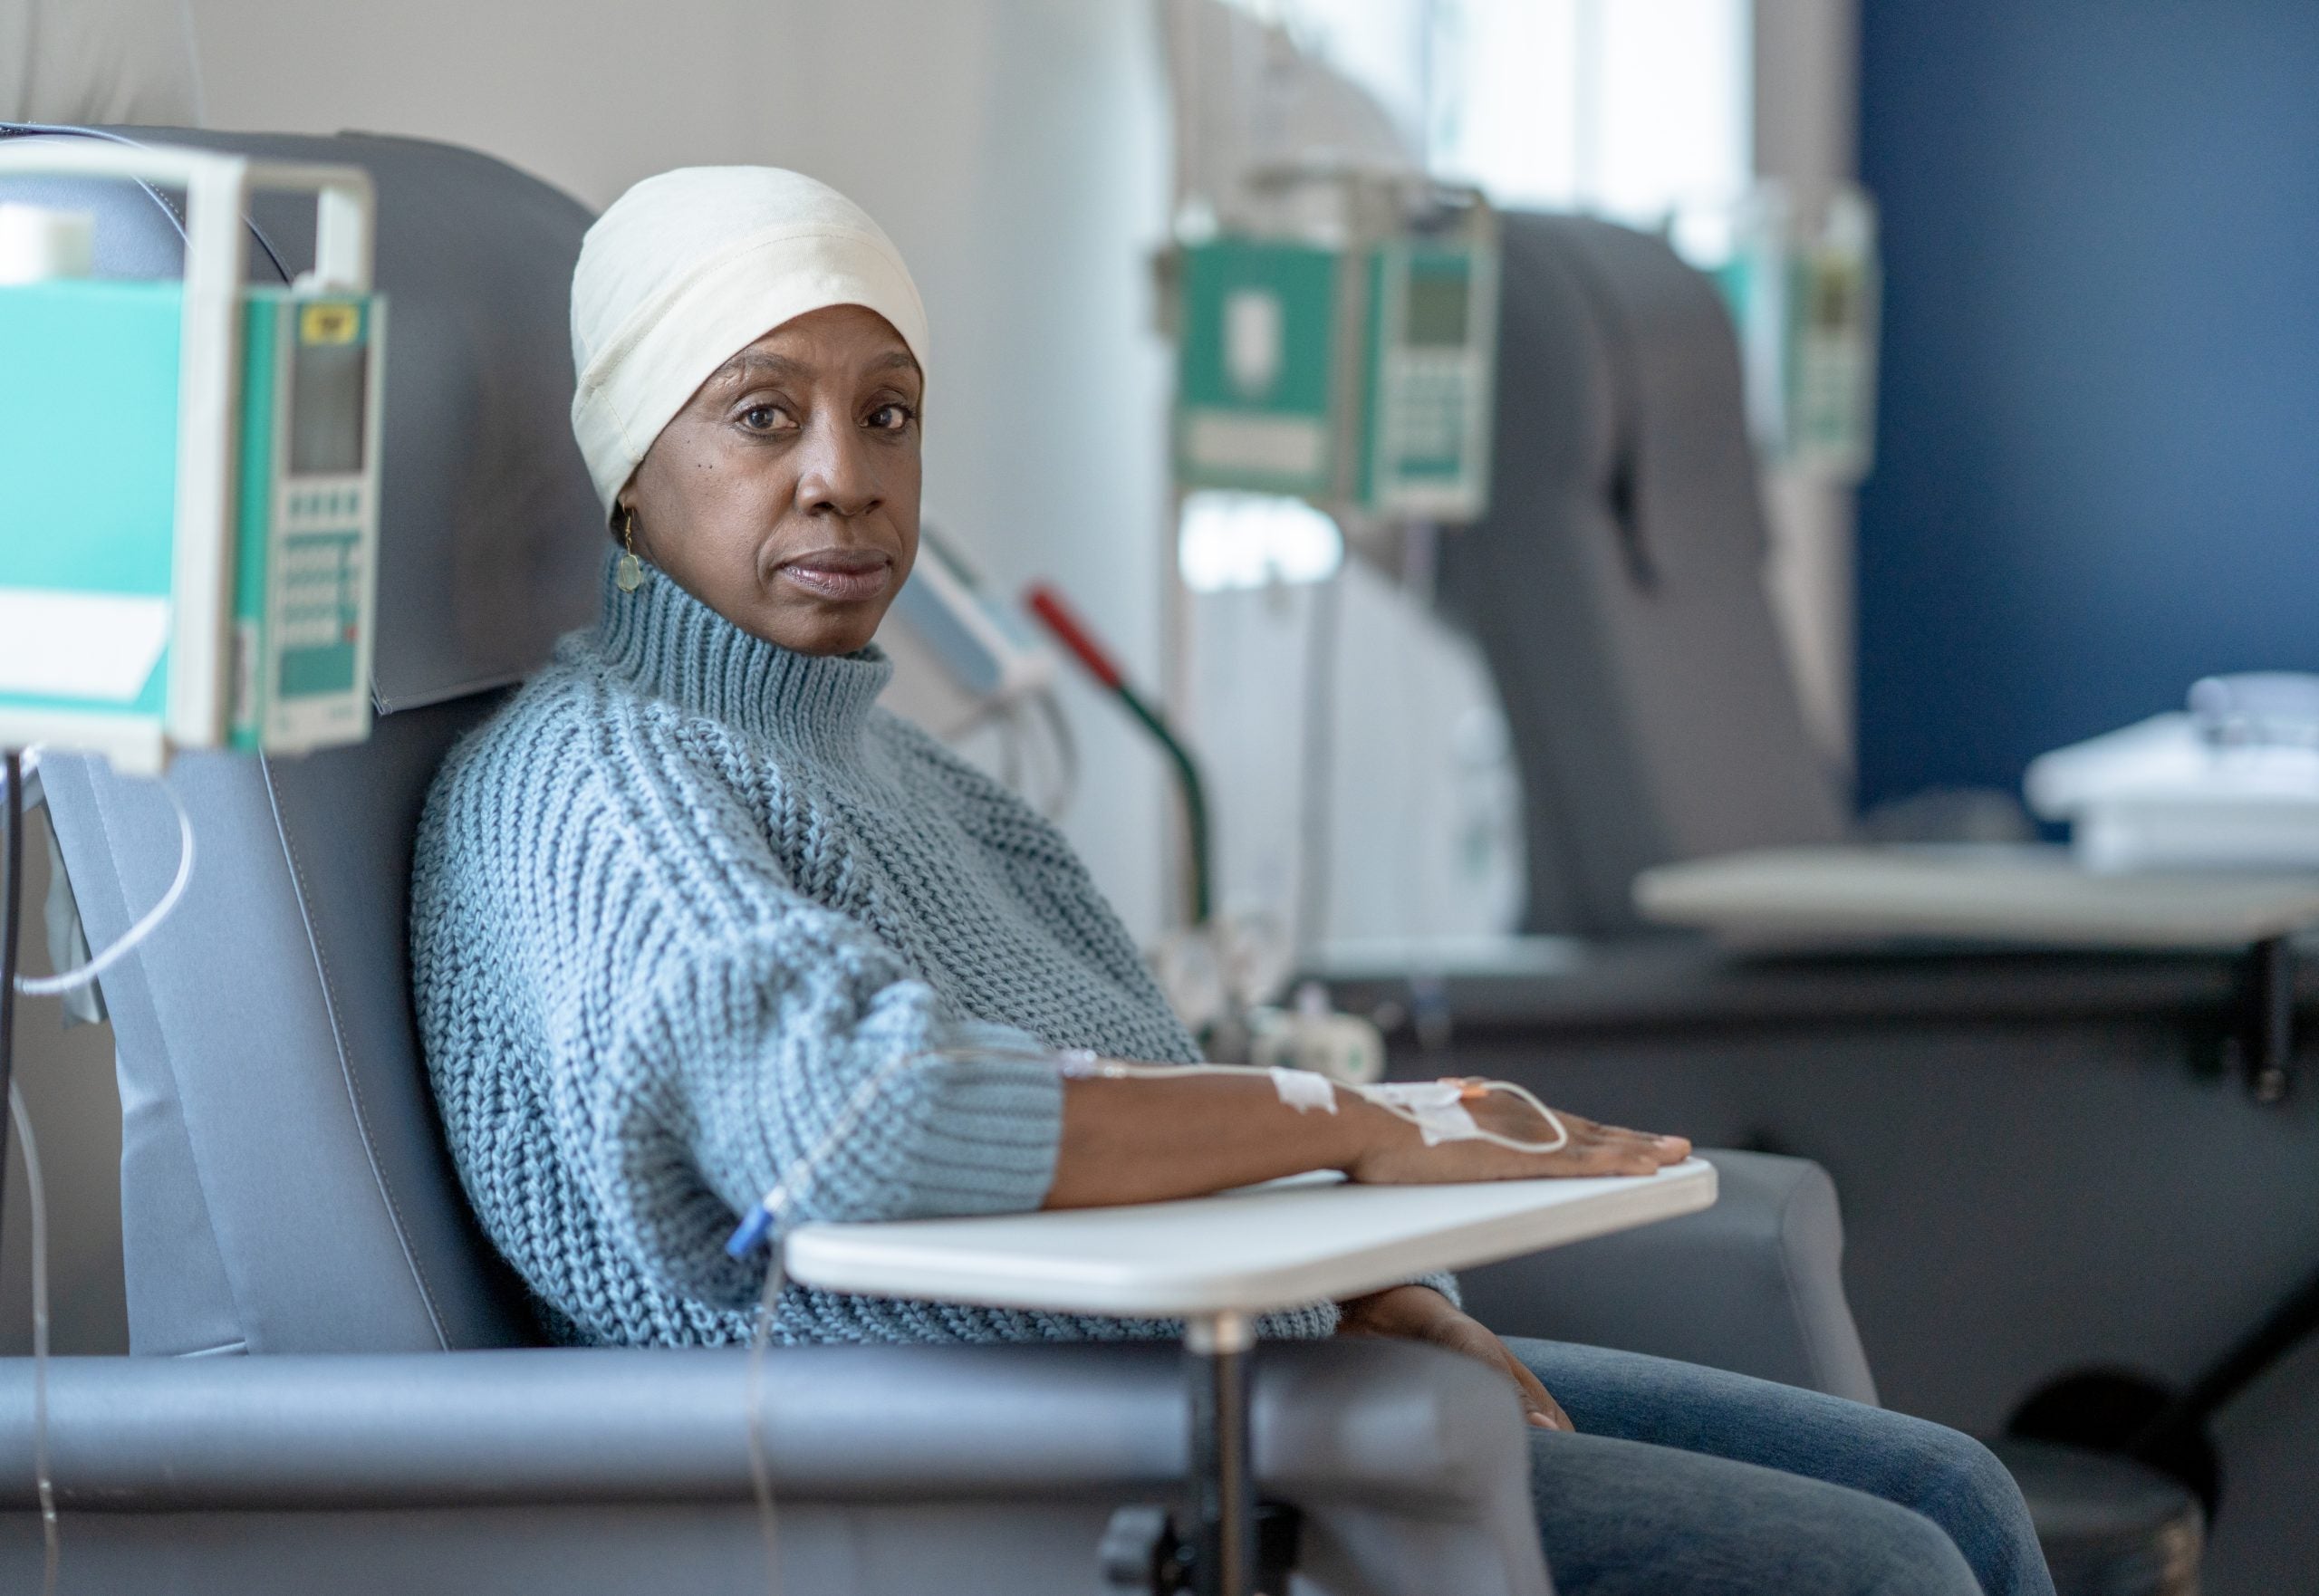 Black Women Are More Likely To Die From Cancer. A New First Of It’s Kind Study Aims To Find Out Why